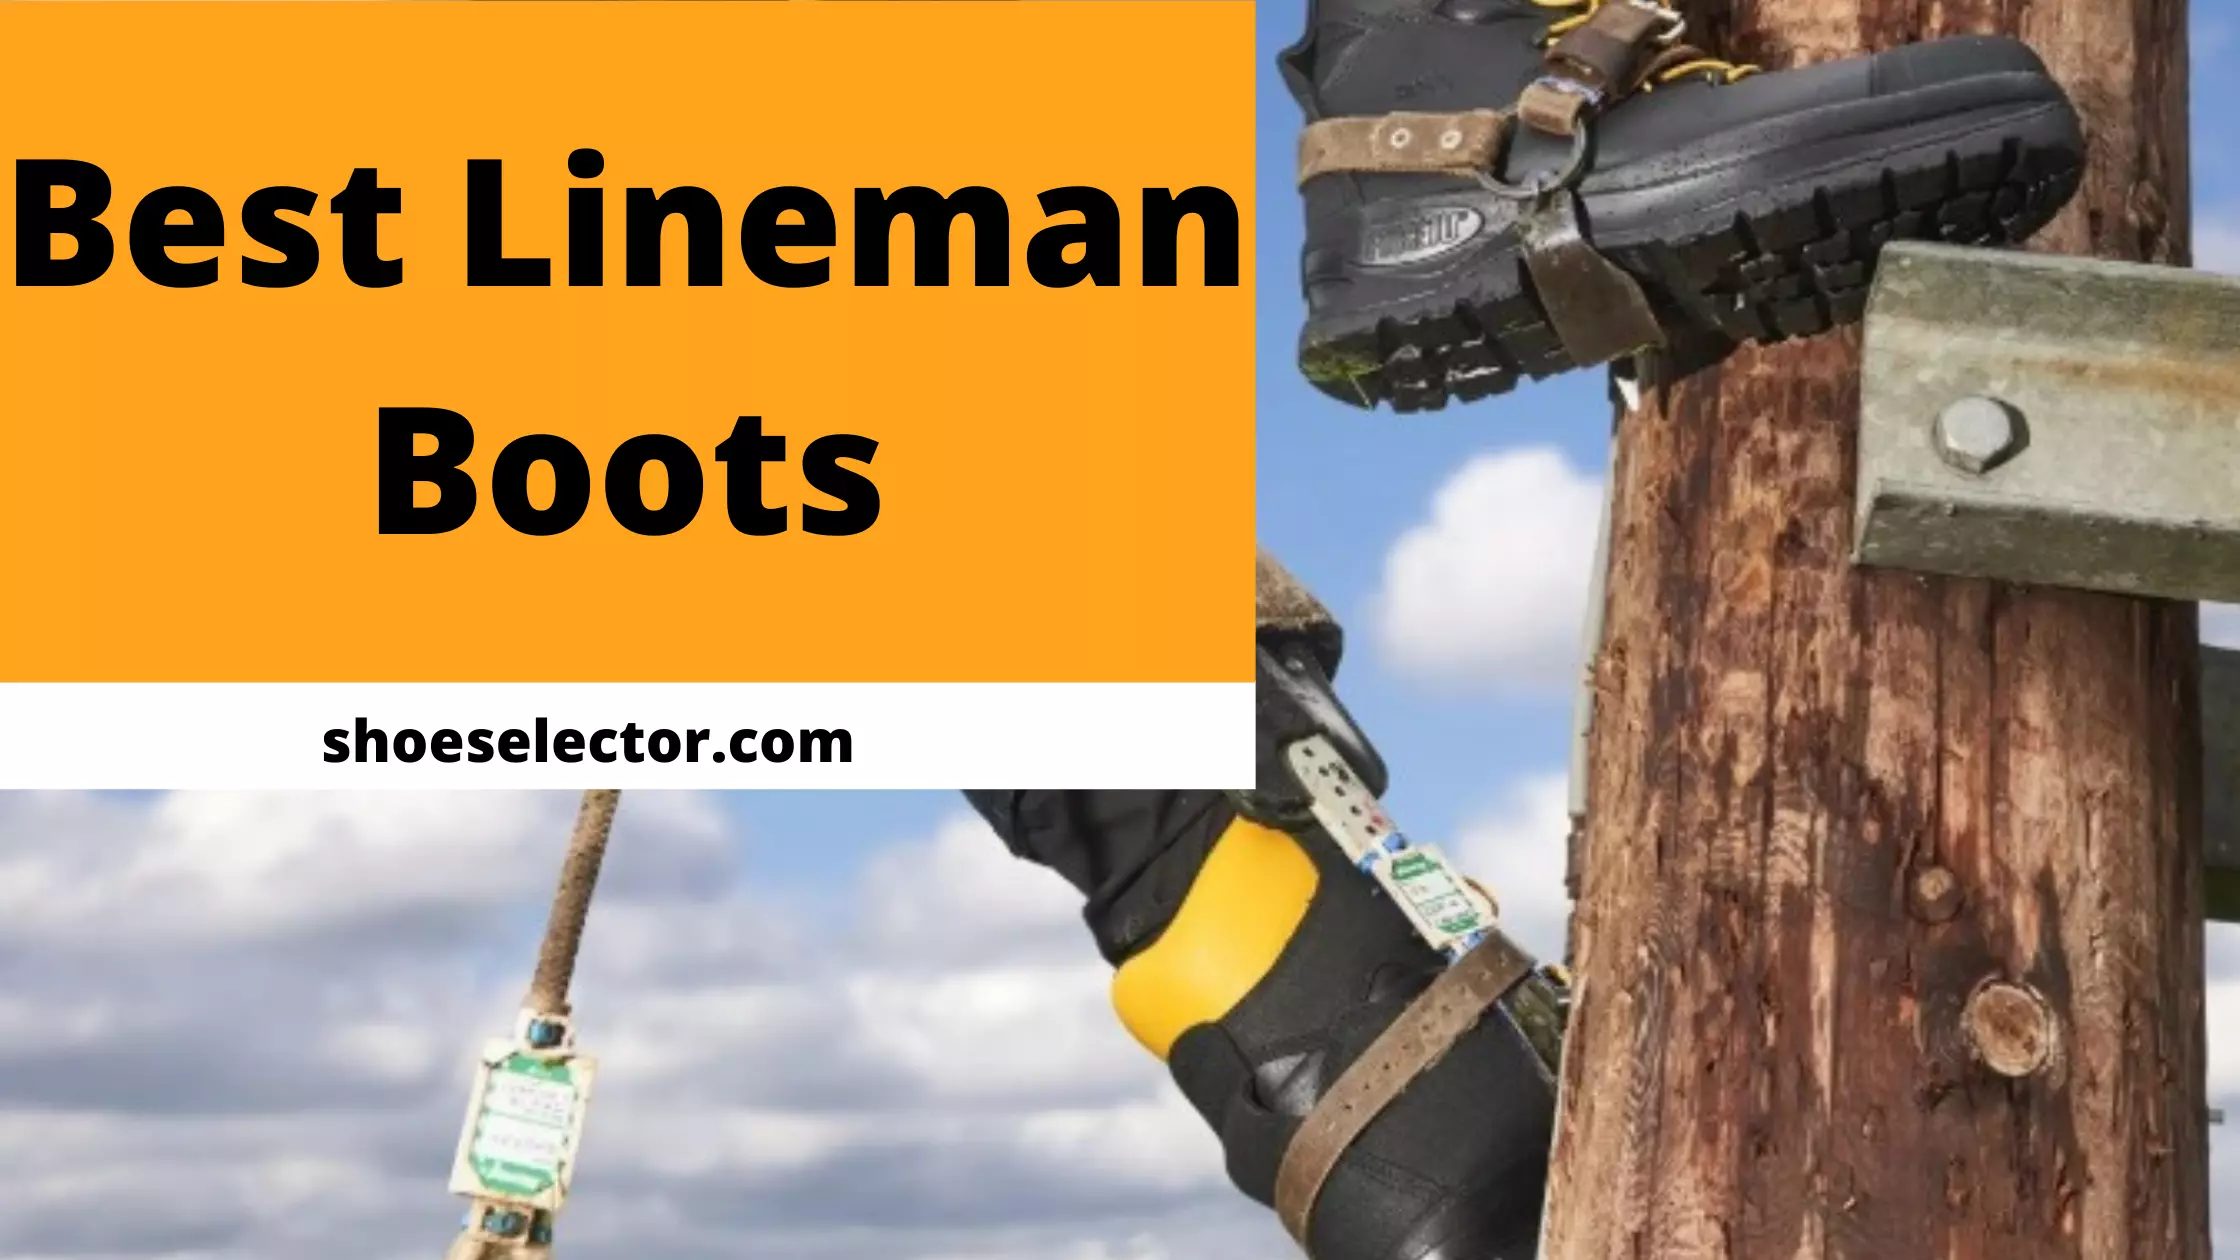 6 Best Lineman Boots Reviews [REVEALED Top Picks in 2022]